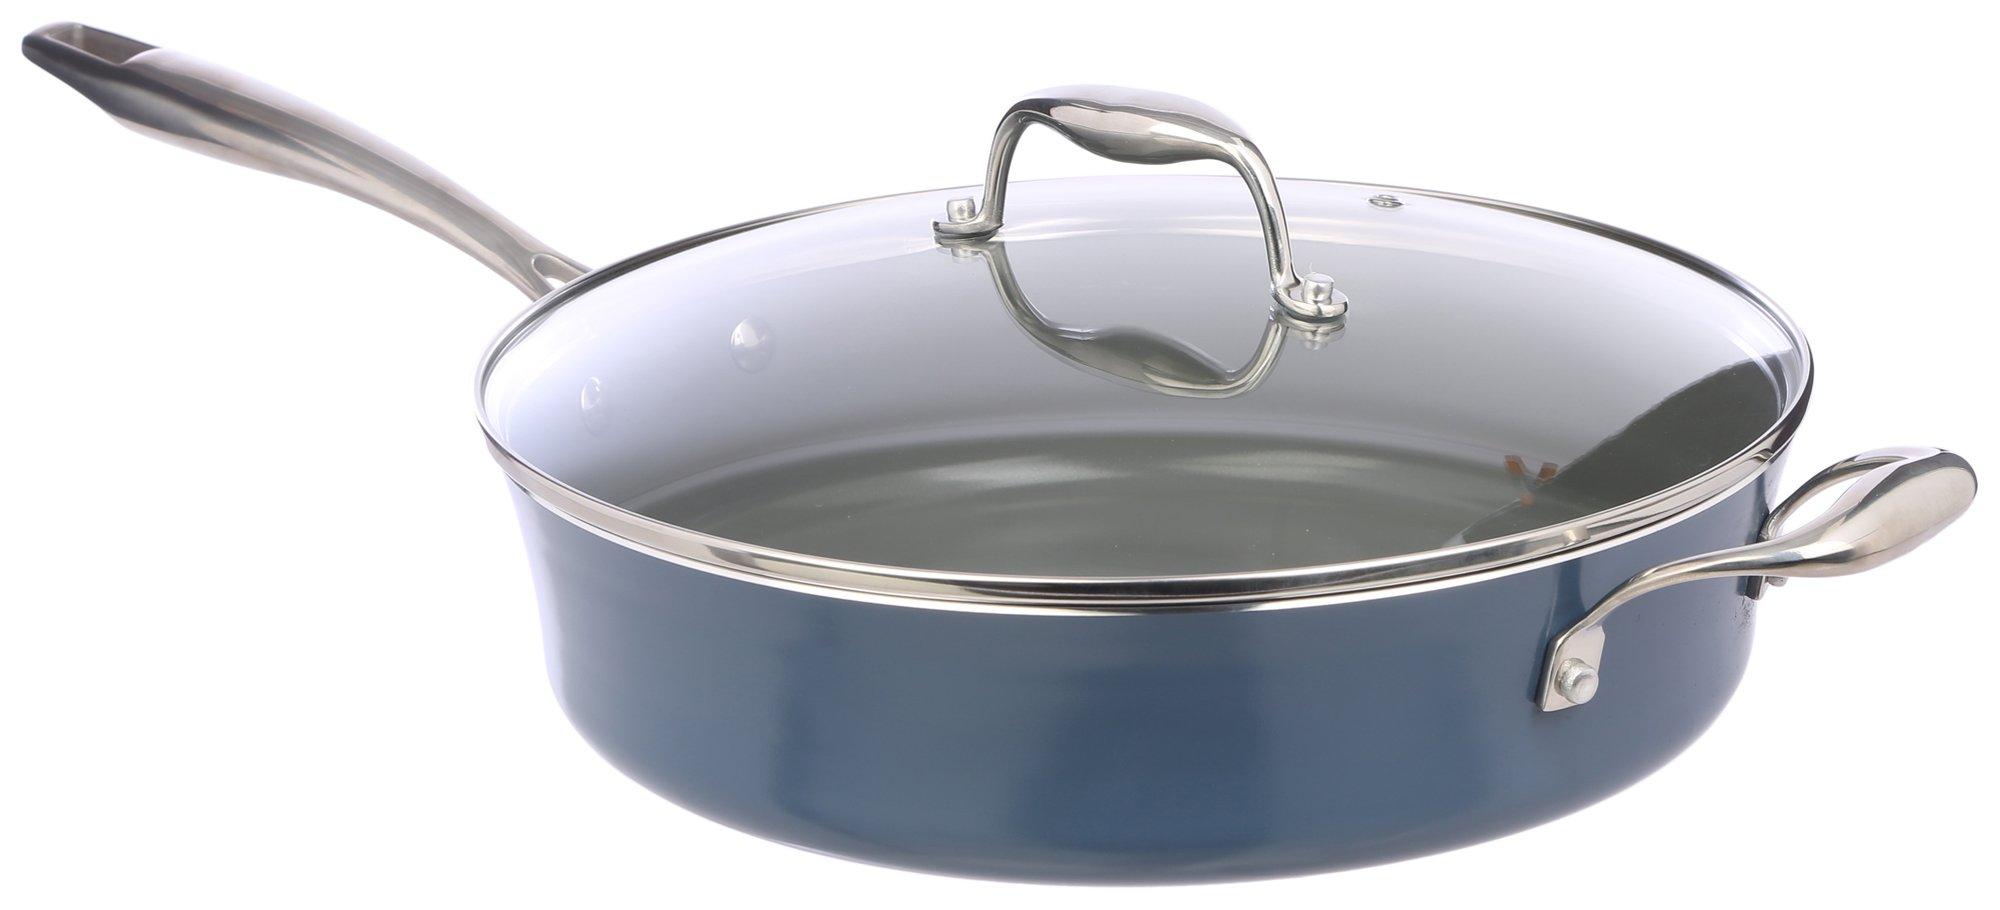 https://images.beallsflorida.com/i/beallsflorida/651-8454-6289-40-yyy/*Zest-Kitchen-and-Home-Everyday-Pan-With-Lid*?$product$&fmt=auto&qlt=default